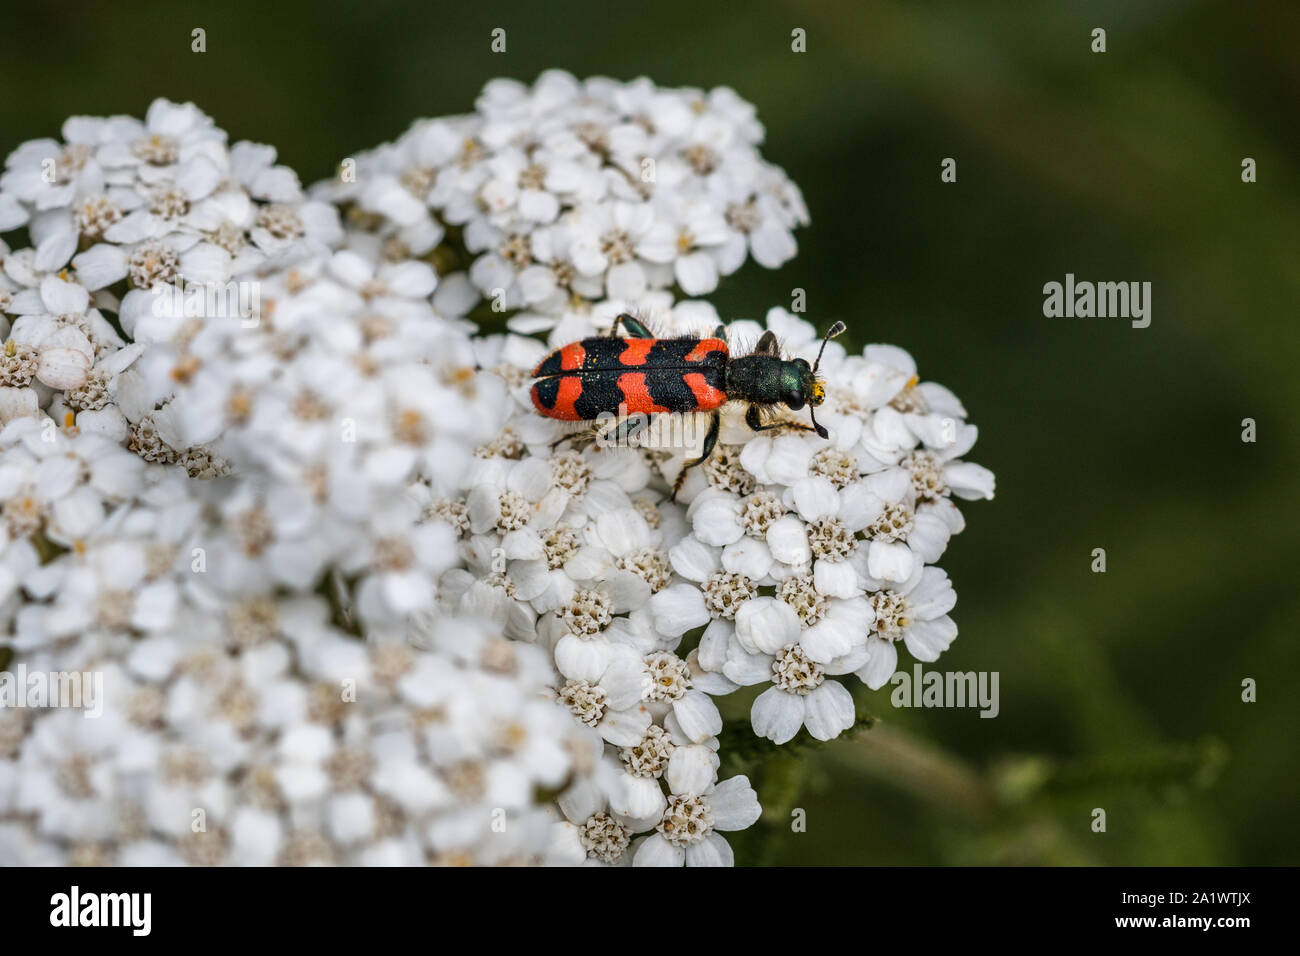 The world view of a tiny beetle on a white flower Stock Photo